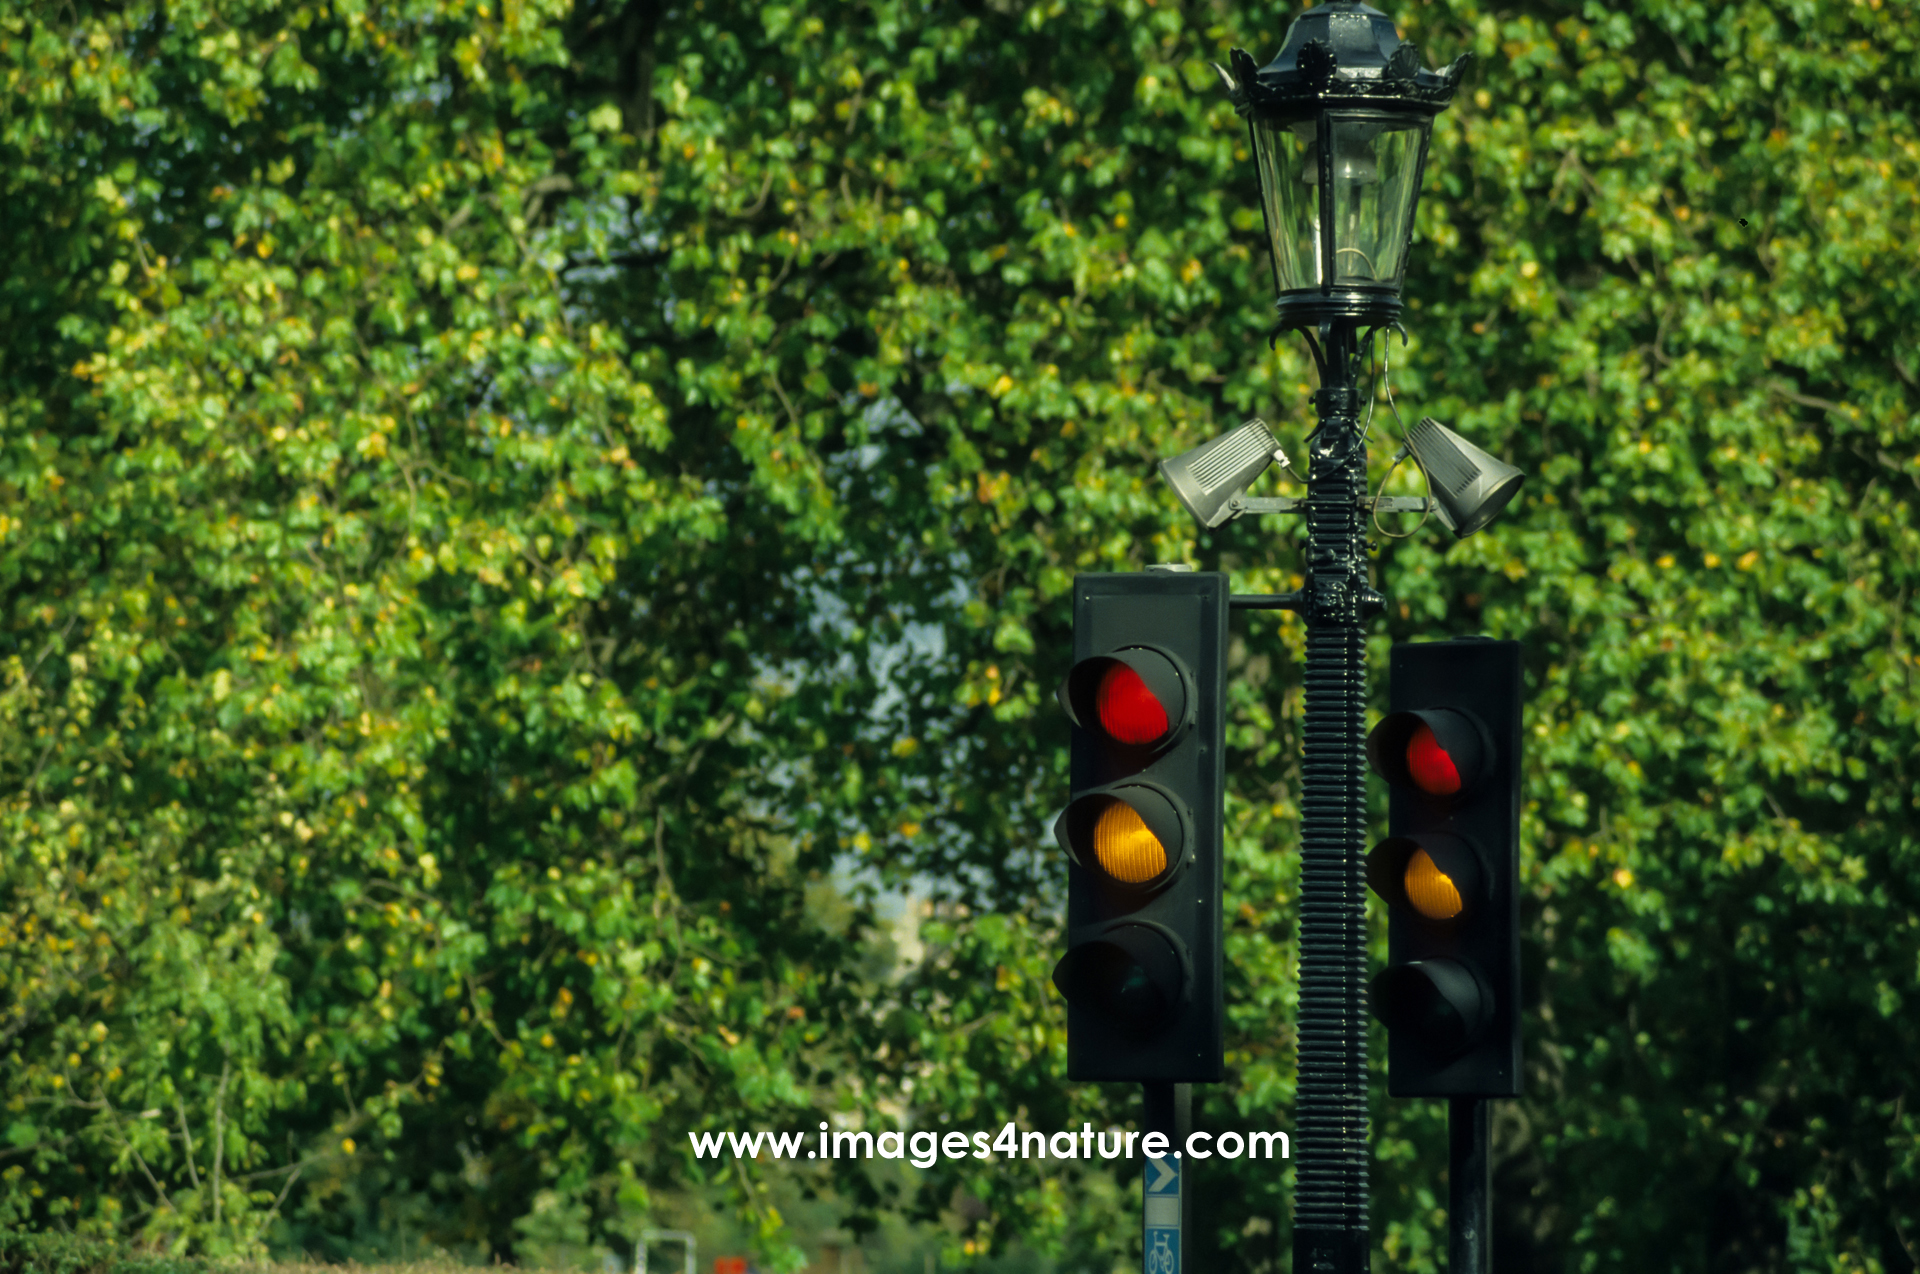 Two traffic lights on red yellow lights against green background